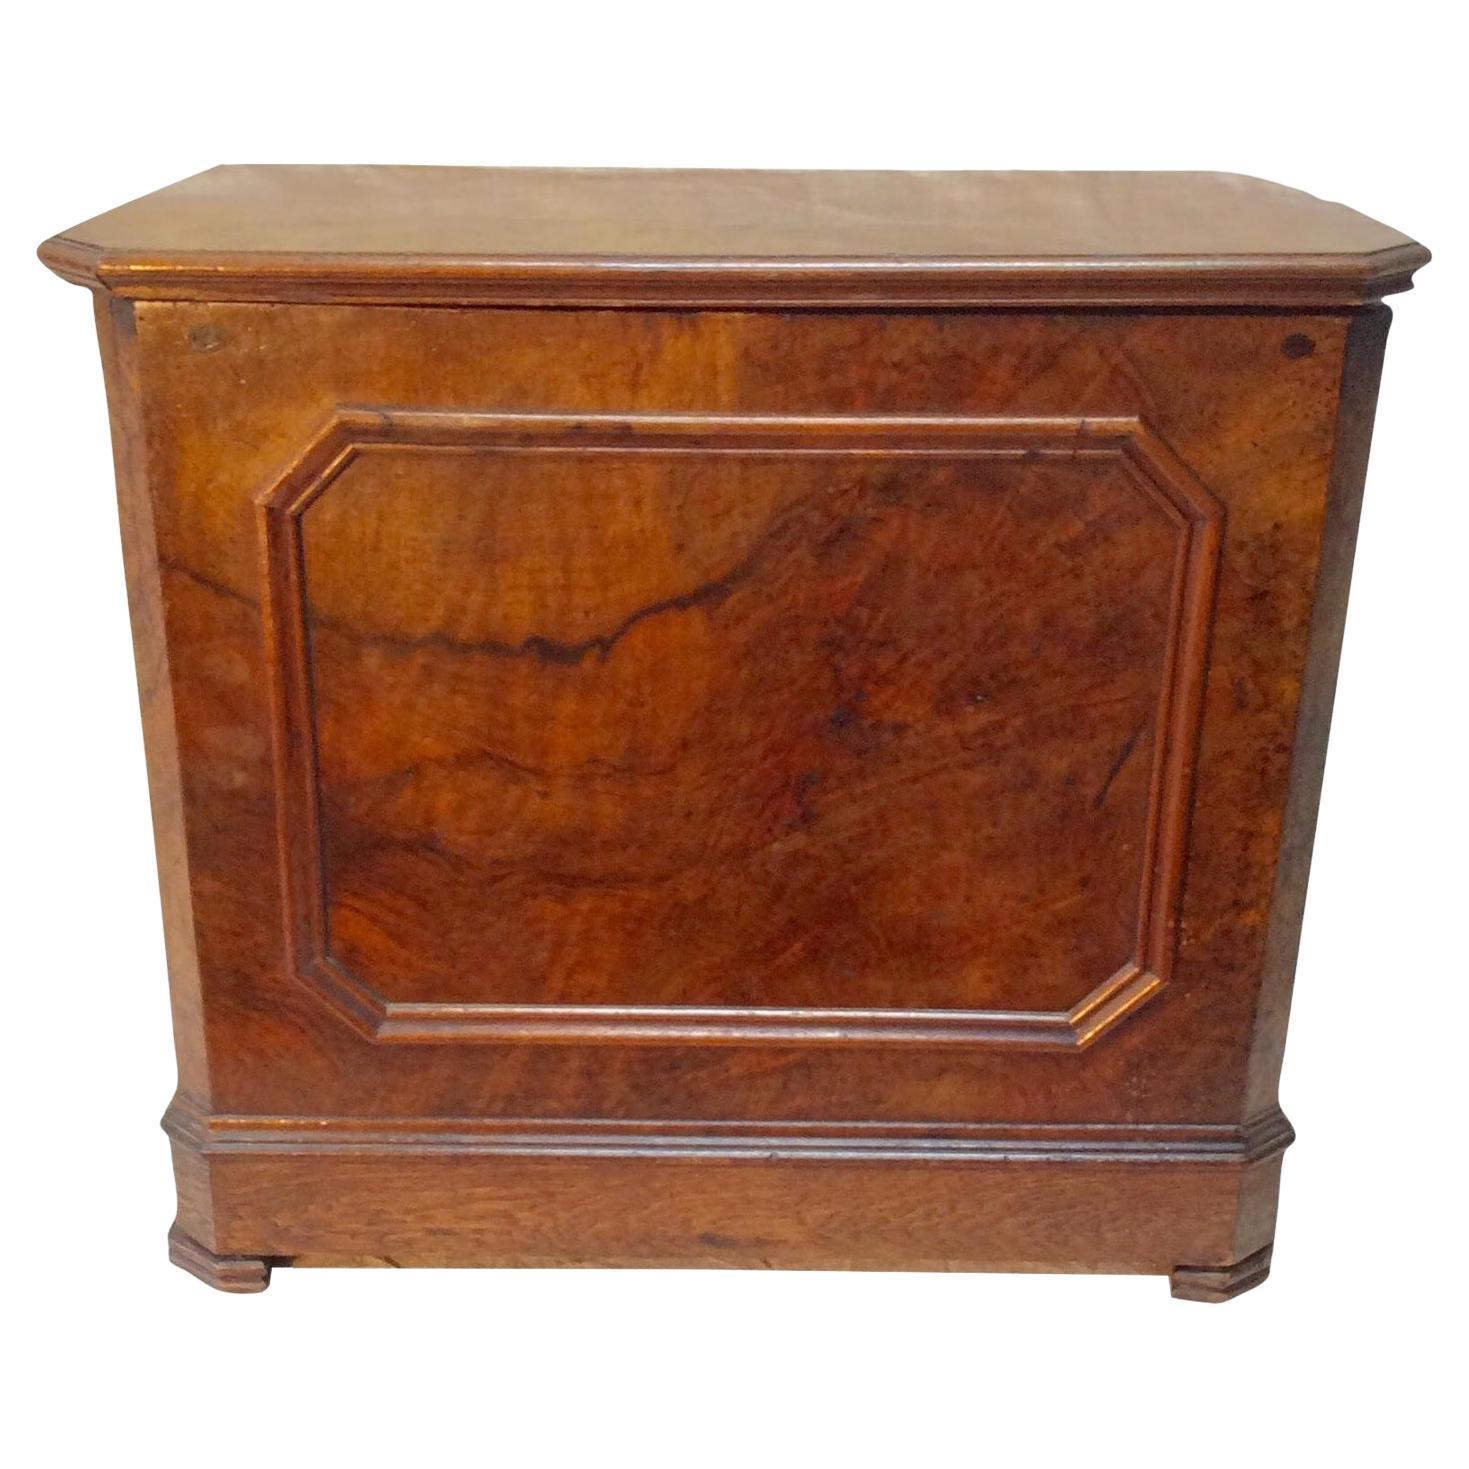 Late 19th Century French Burlwood Trunk